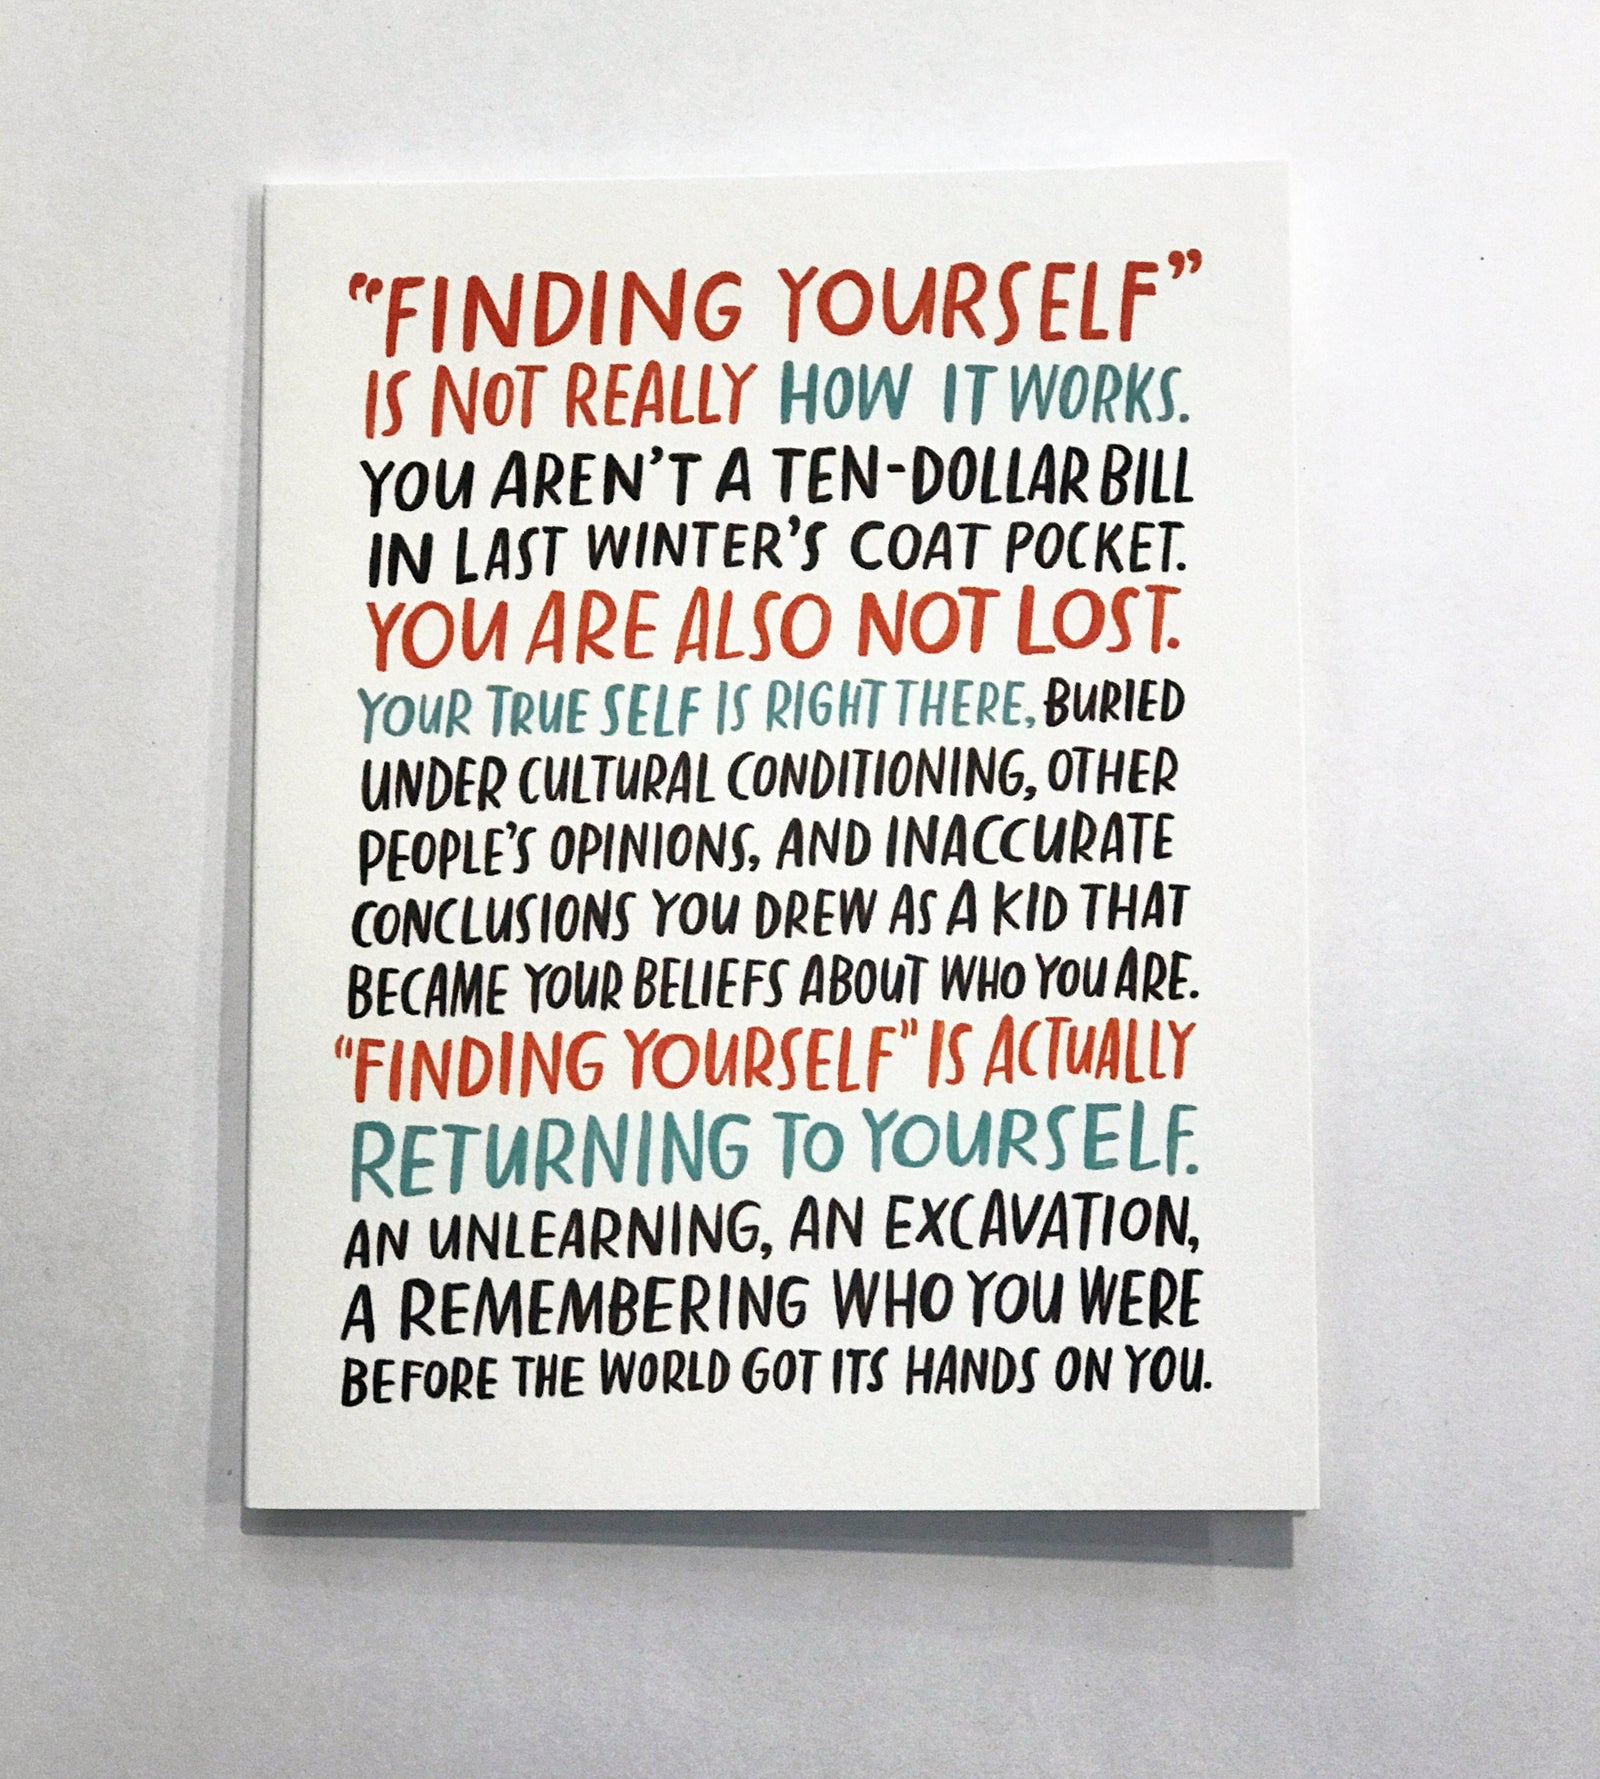 Greeting card on white background. It says "Finding Yourself is not really how it works. You aren't a ten-dollar bill in last winter's coat pocket. You are also not lost. Your true self is right there. Buried under cultural conditioning, other people's opinions, and inaccurate conclusions you drew as a kid that became your beliefs about who you are. Finding yourself is actually returning to yourself. An unlearning, an excavation, a remembering who you were before the world got its hands on you." 